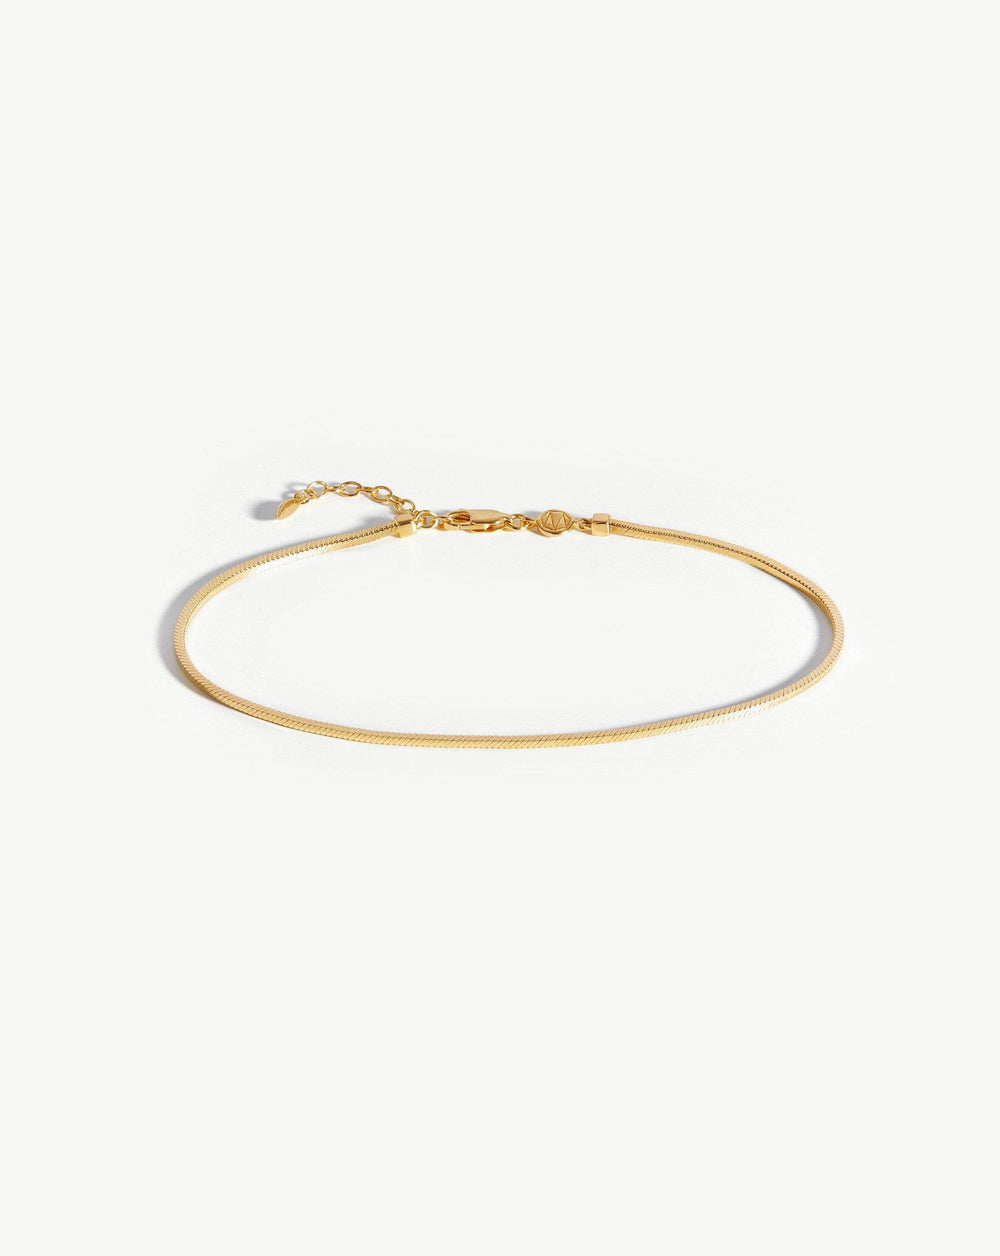 Lucy Williams Square Snake Chain Anklet | Missoma